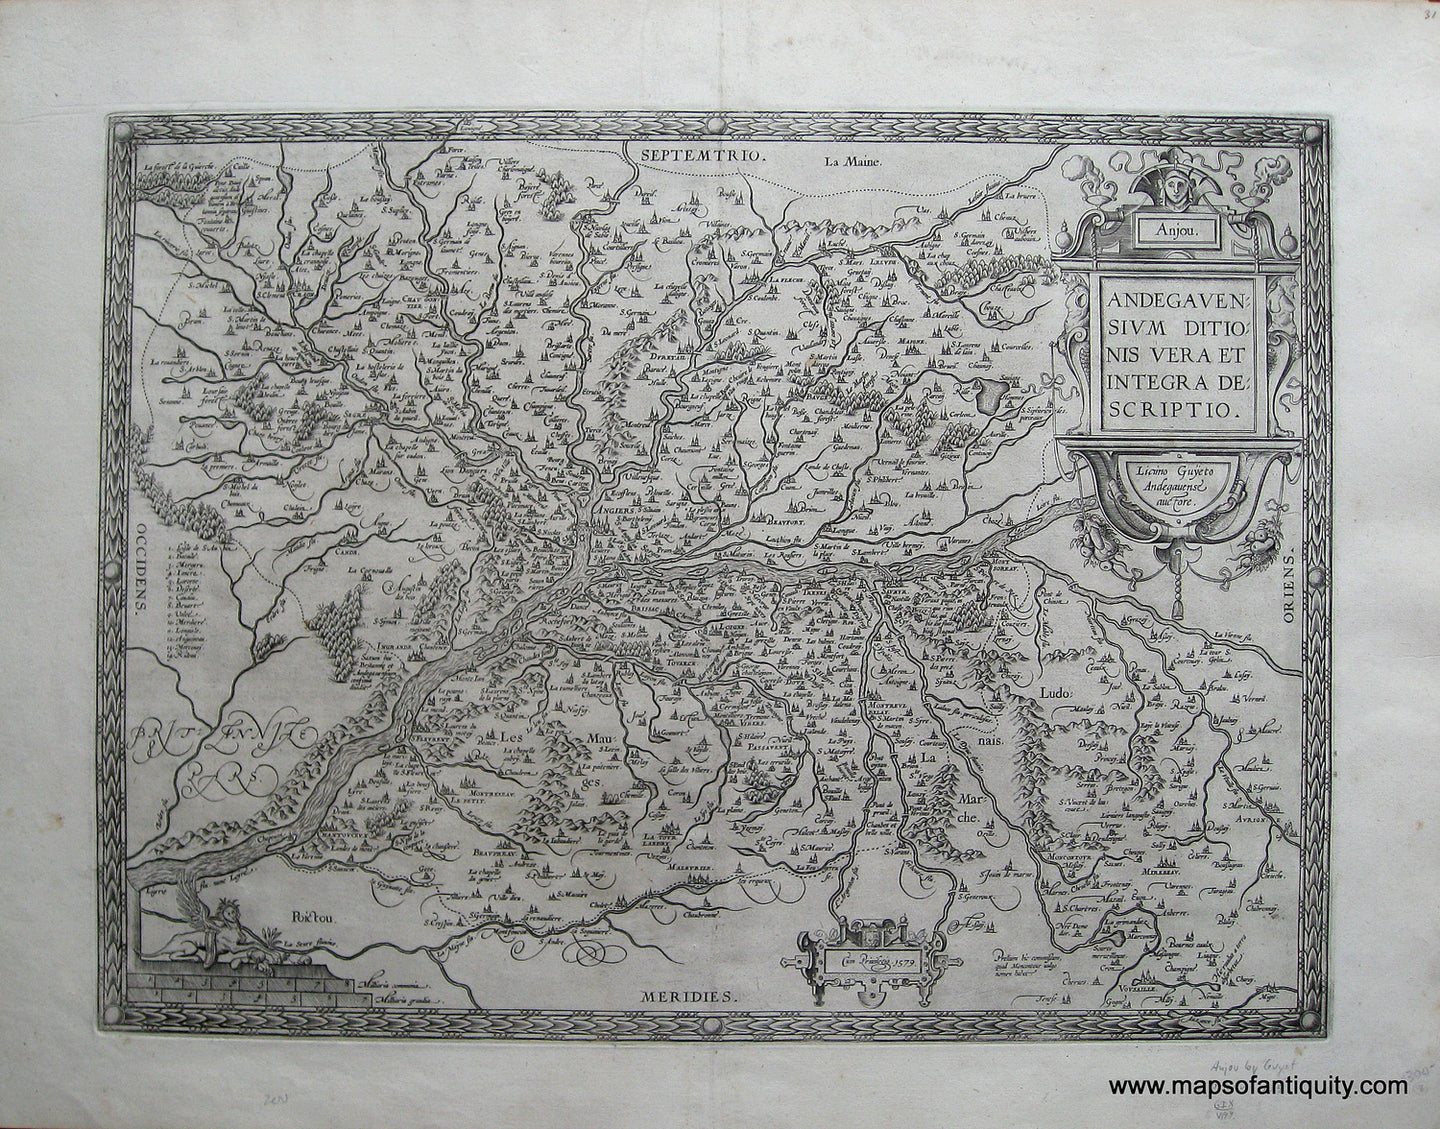 Antique-Black-and-White-Engraved-Map-Anjou.-Andegaven-Sium-DitionisÃ¢â‚¬Â¦France-France--1579-Ortelius-Maps-Of-Antiquity